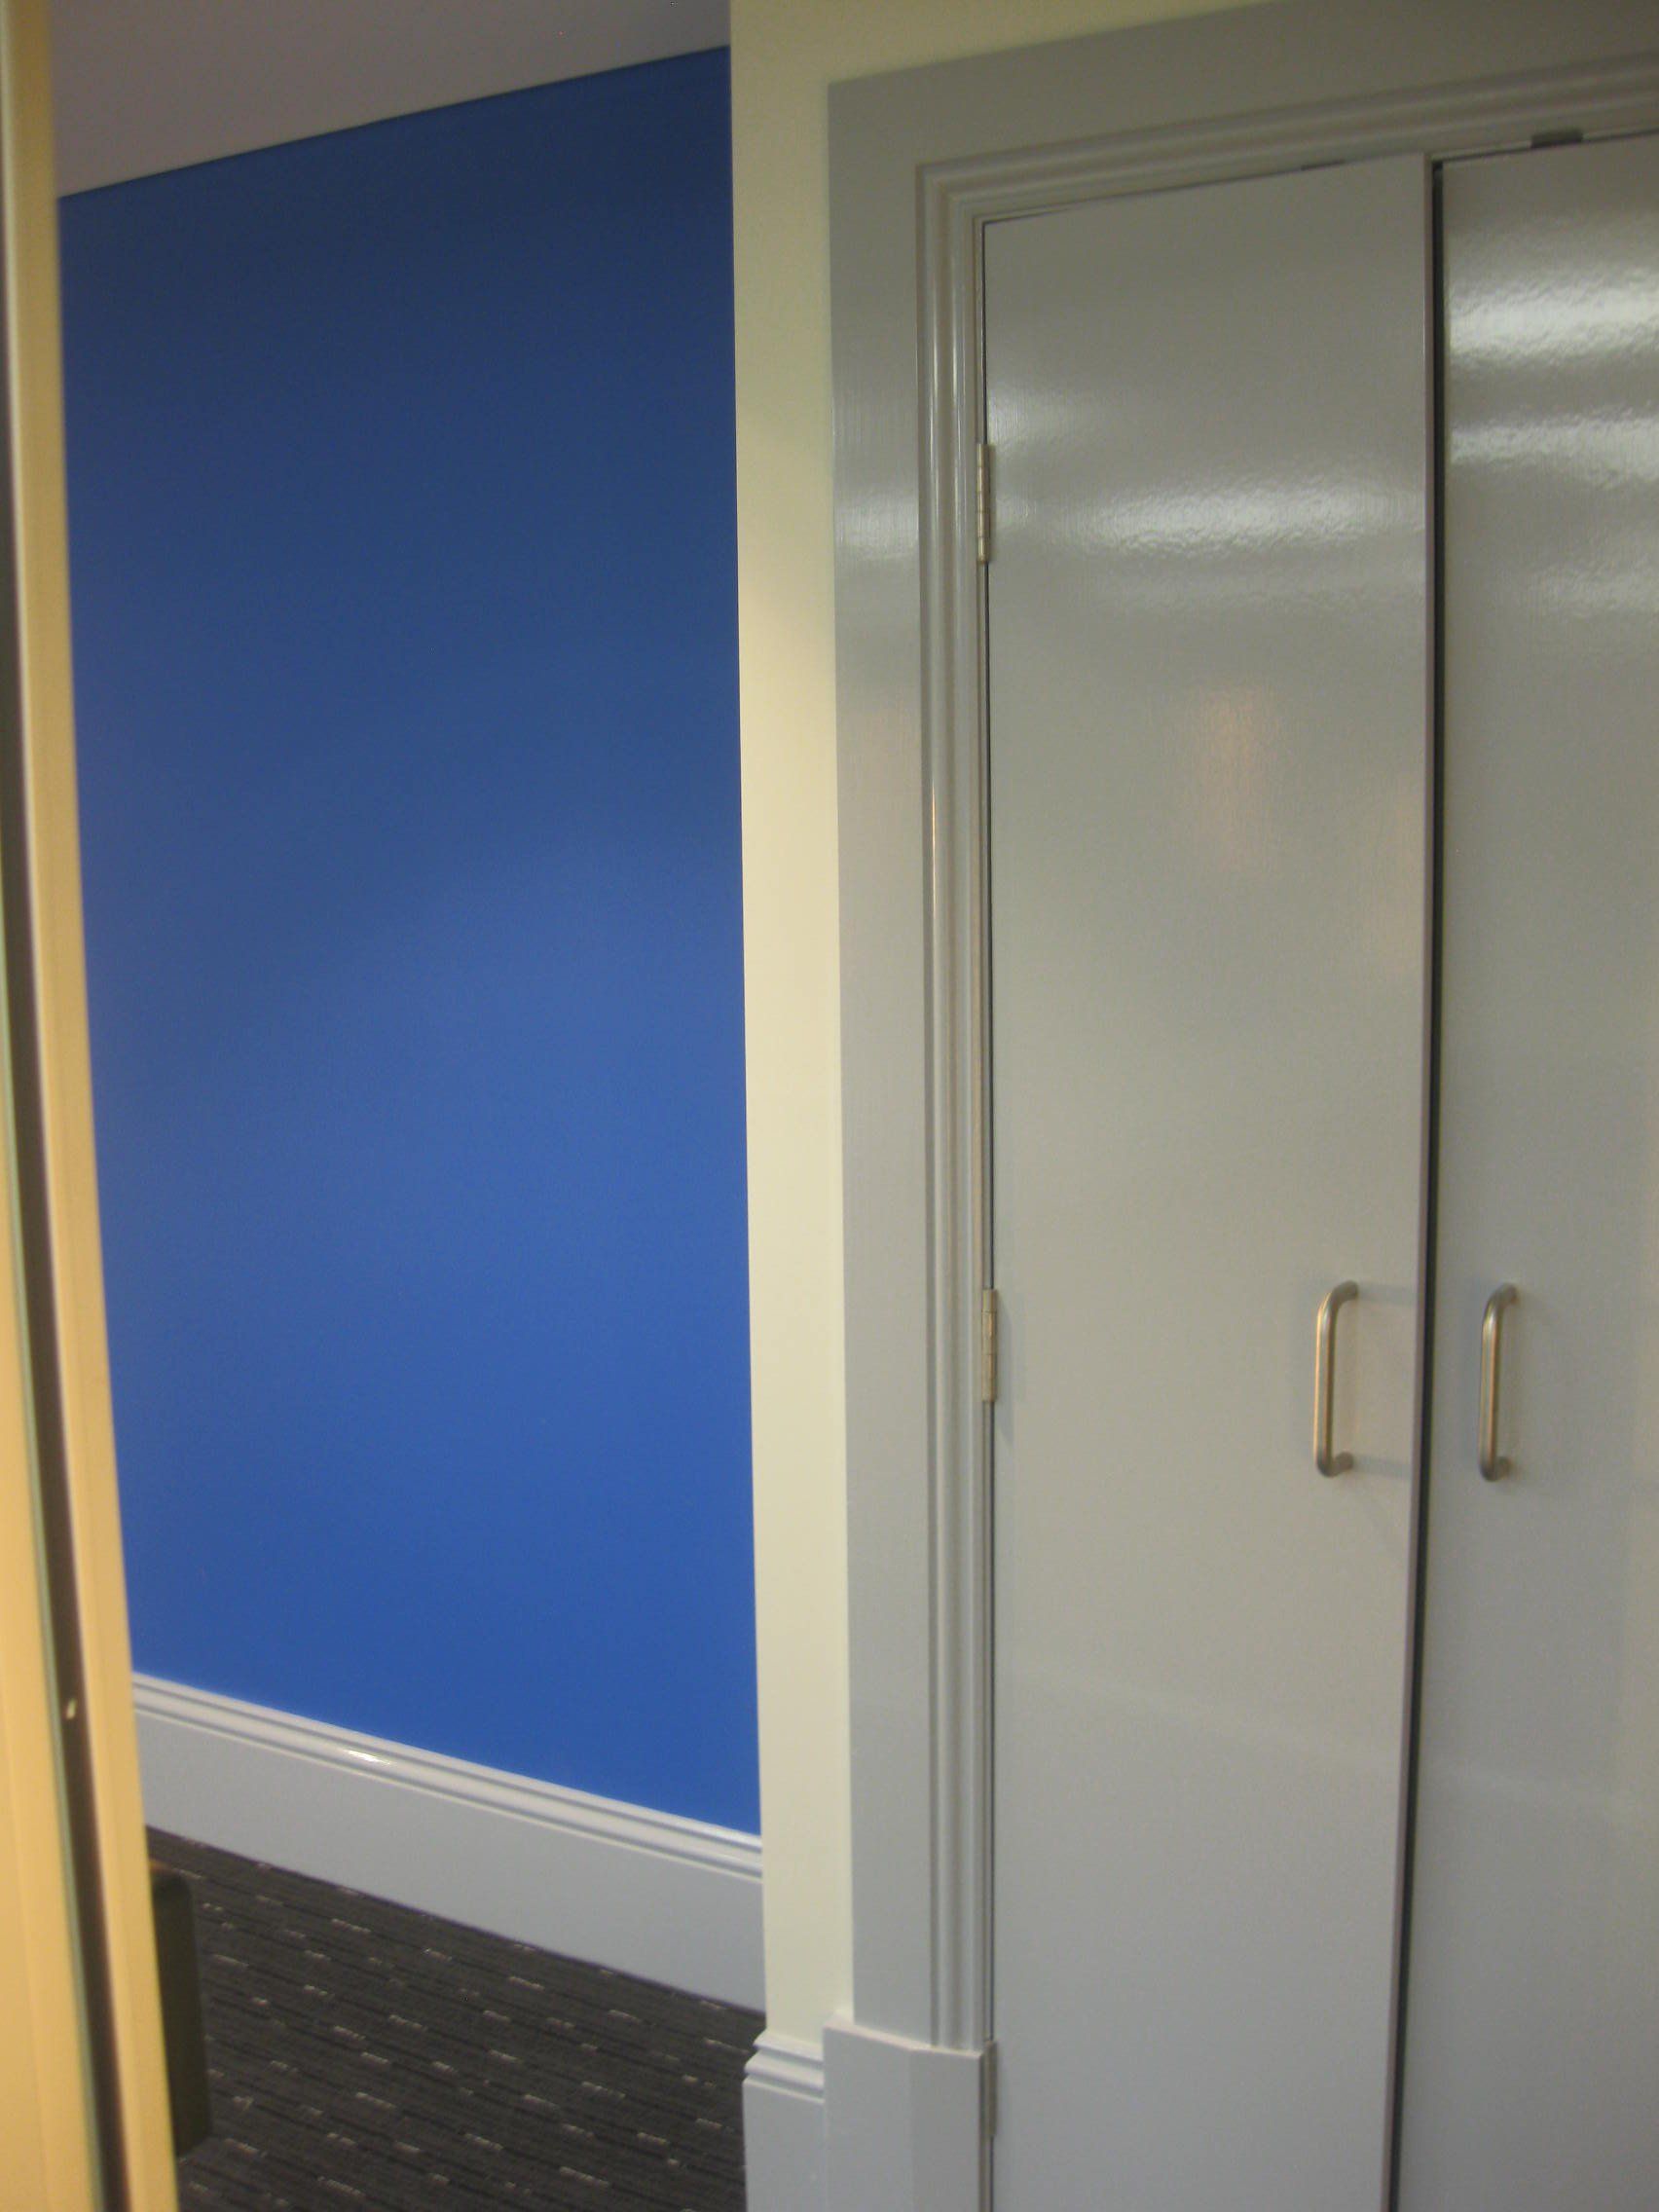 Bright blue feature wall in small room at the Catholic Cathedral Precinct in Armidale